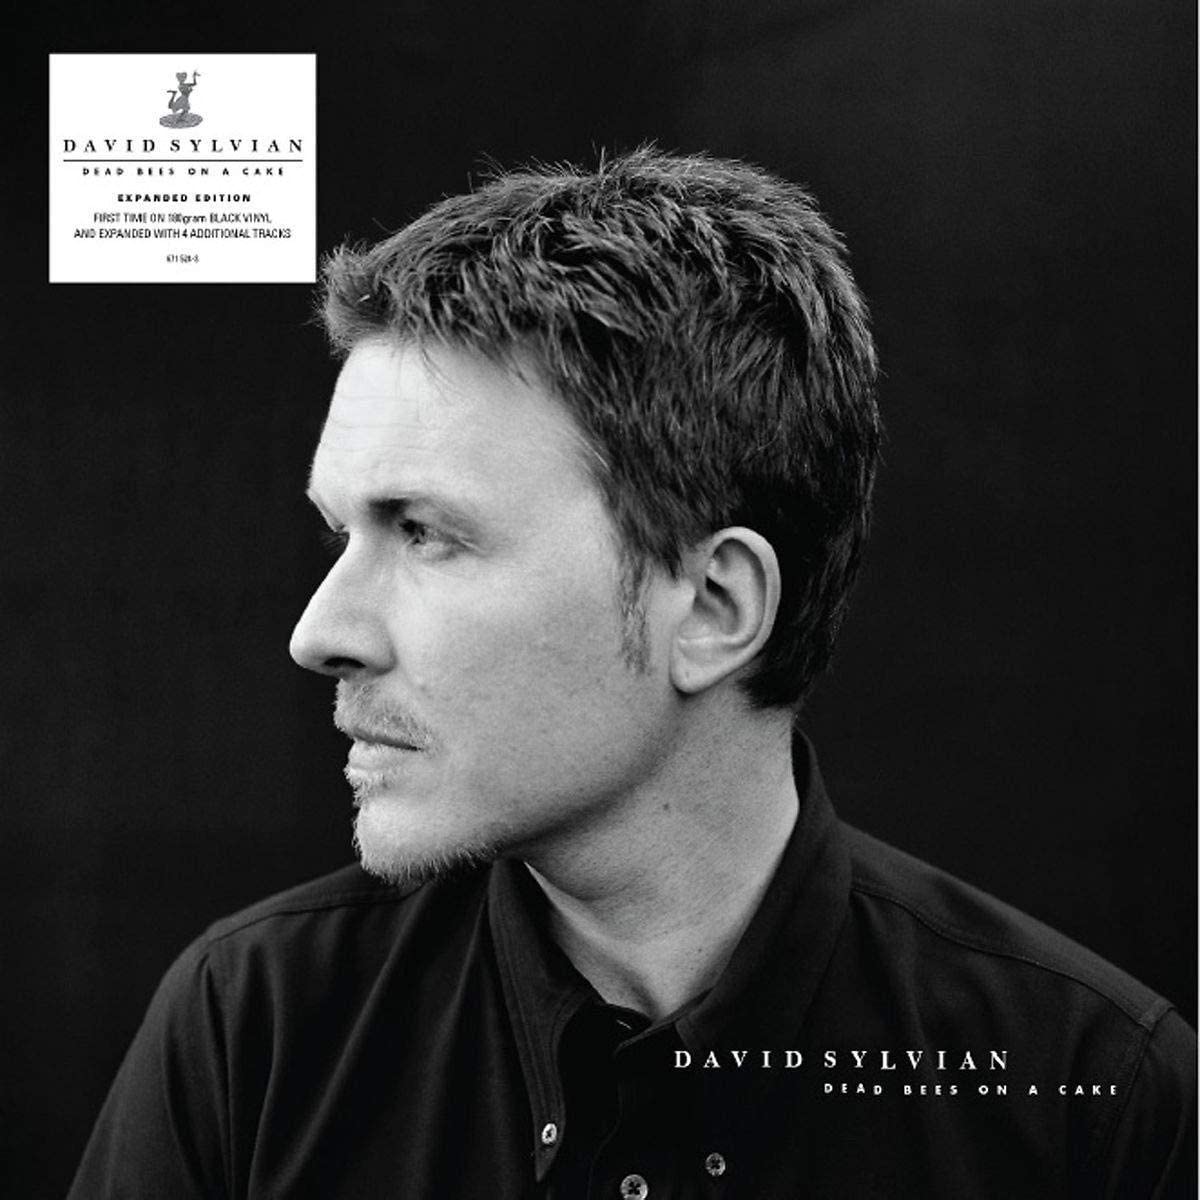 David Sylvian ‎– Dead Bees On A Cake (2xLP, Expanded Edition)